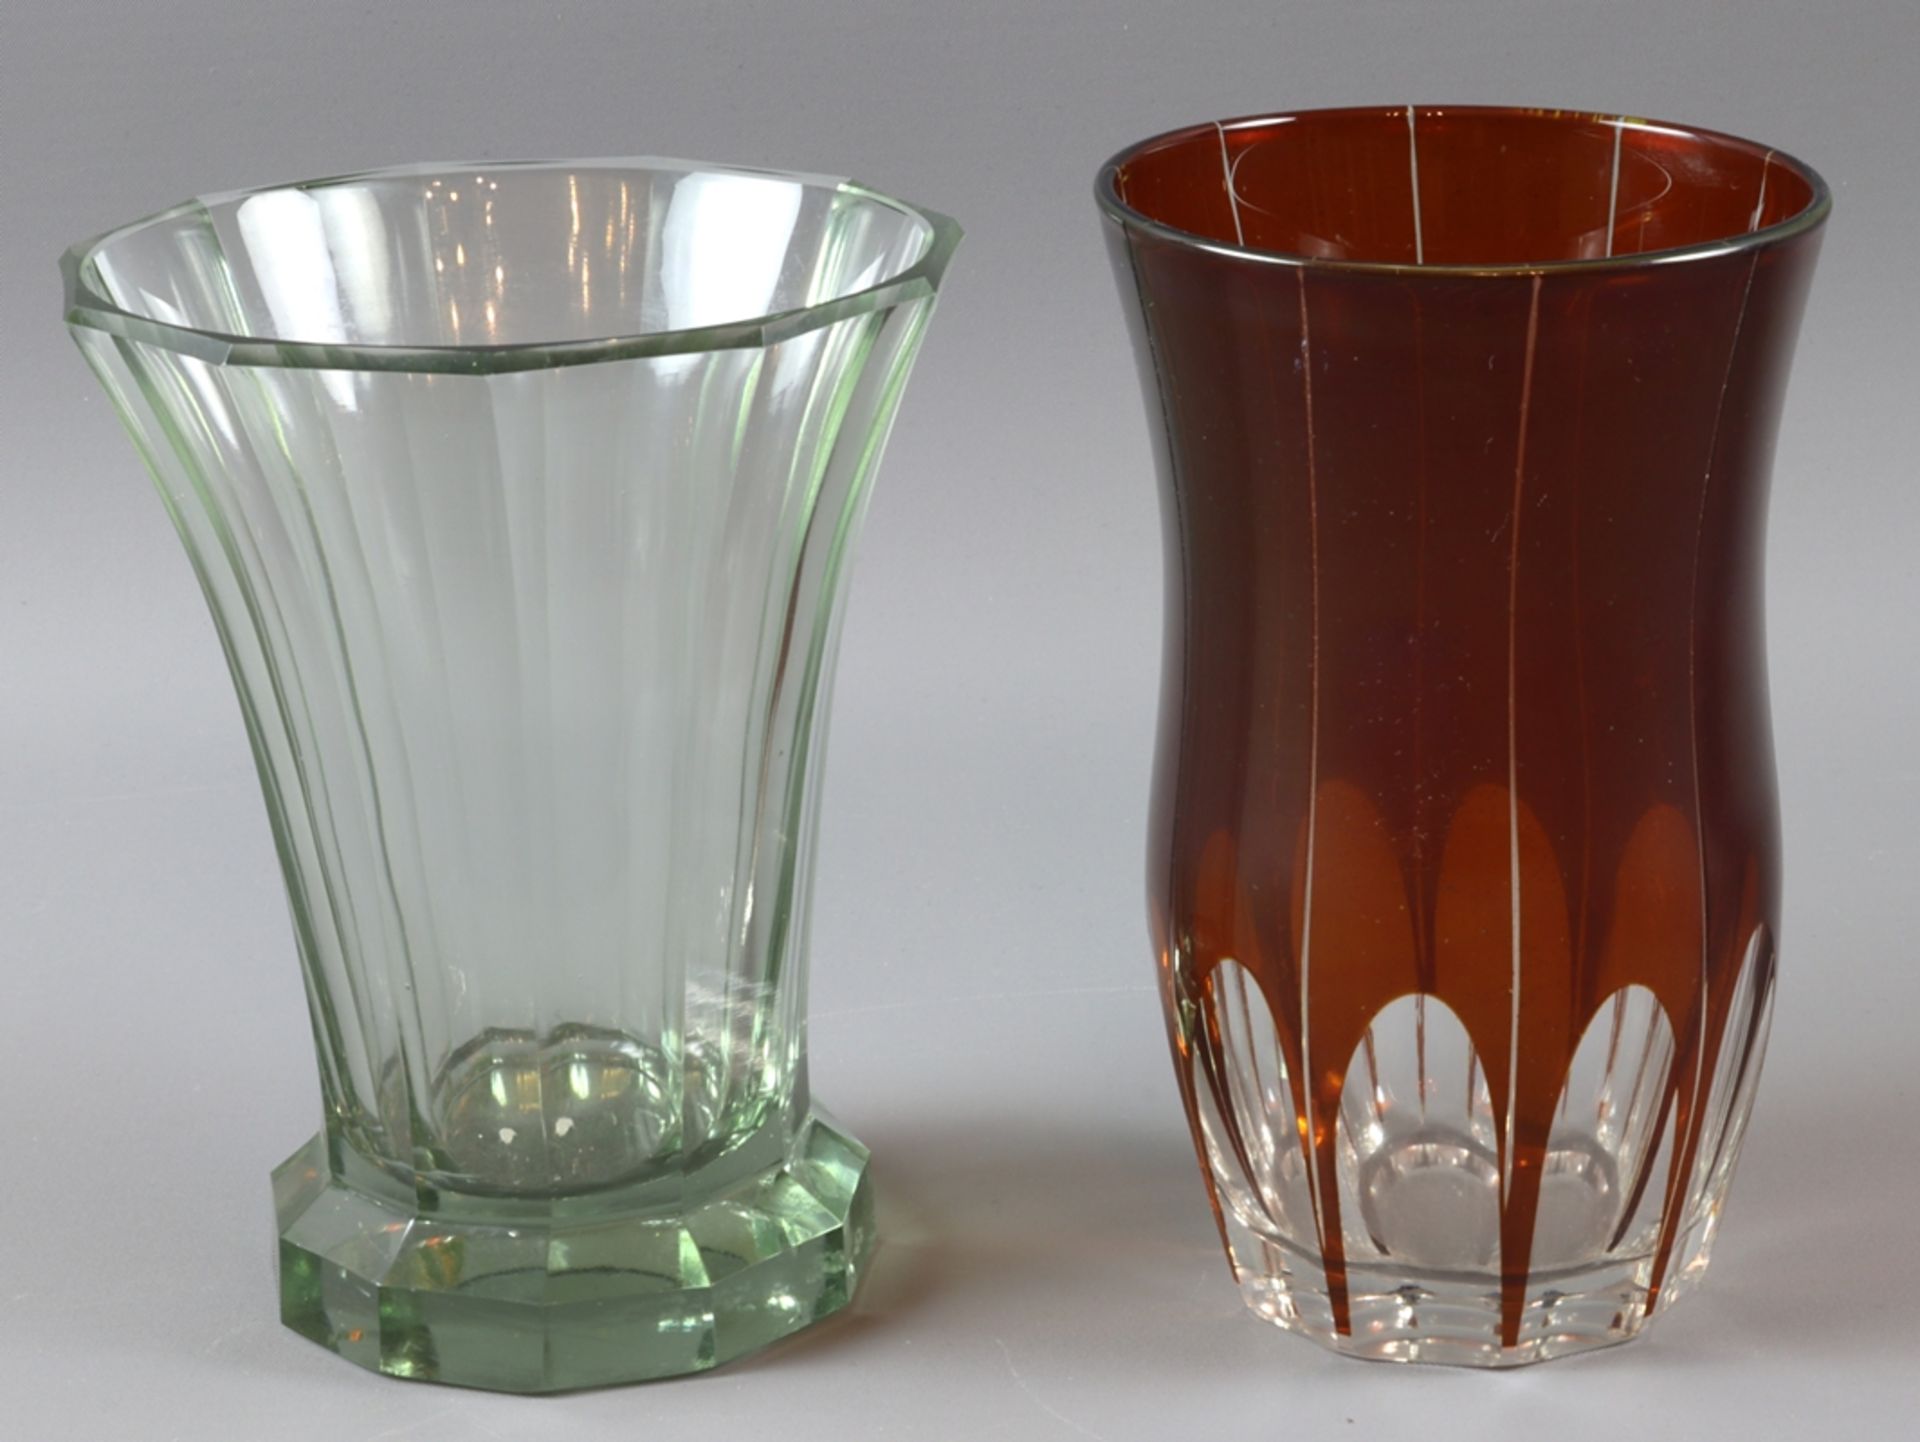 Lot of three different footed tumblers and vases, Bohemia circa 1900-1930, German - Image 2 of 3